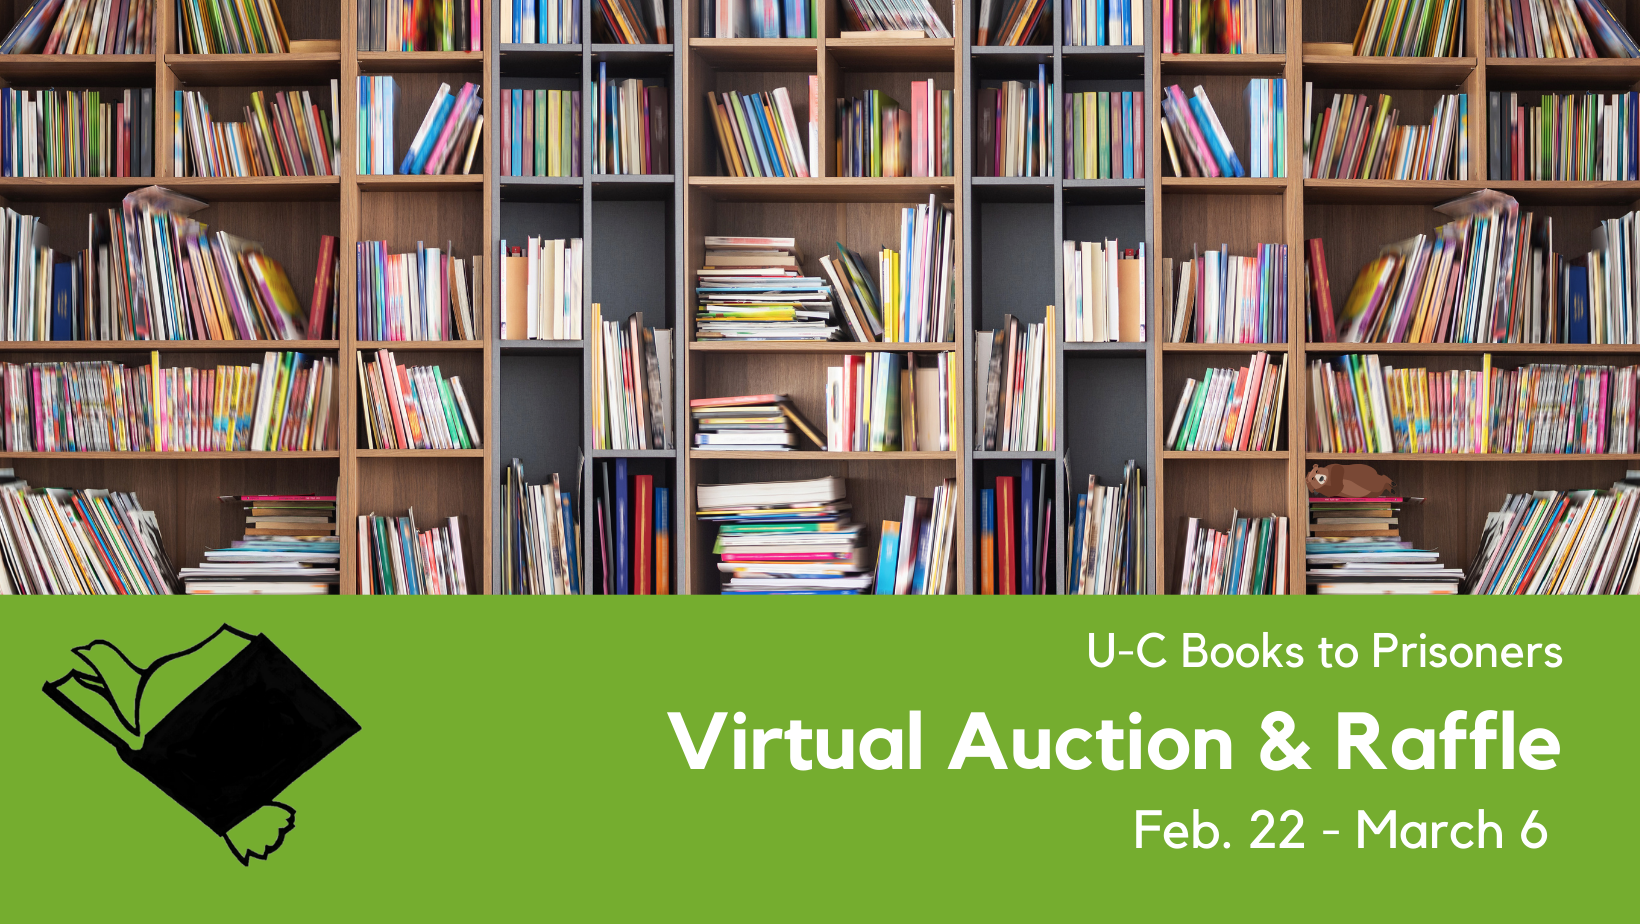 Urbana-Champaign Books to Prisoners hosting first-ever virtual auction and raffle